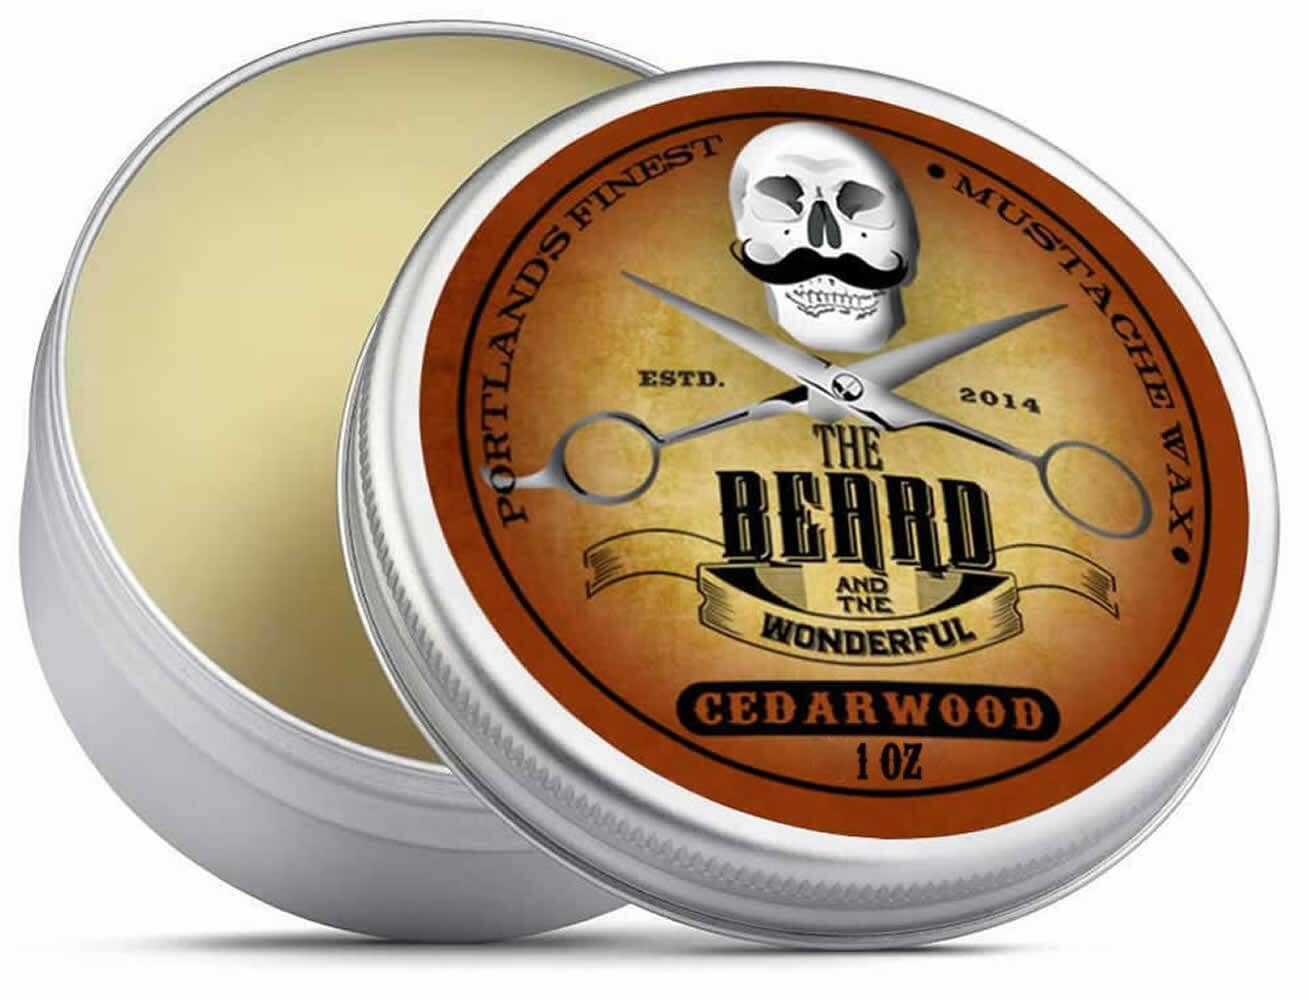 Beard and Moustache Wax Strong Hold Traditional Men's Grooming The Beard and The Wonderful Cedarwood (Essential Oil) 